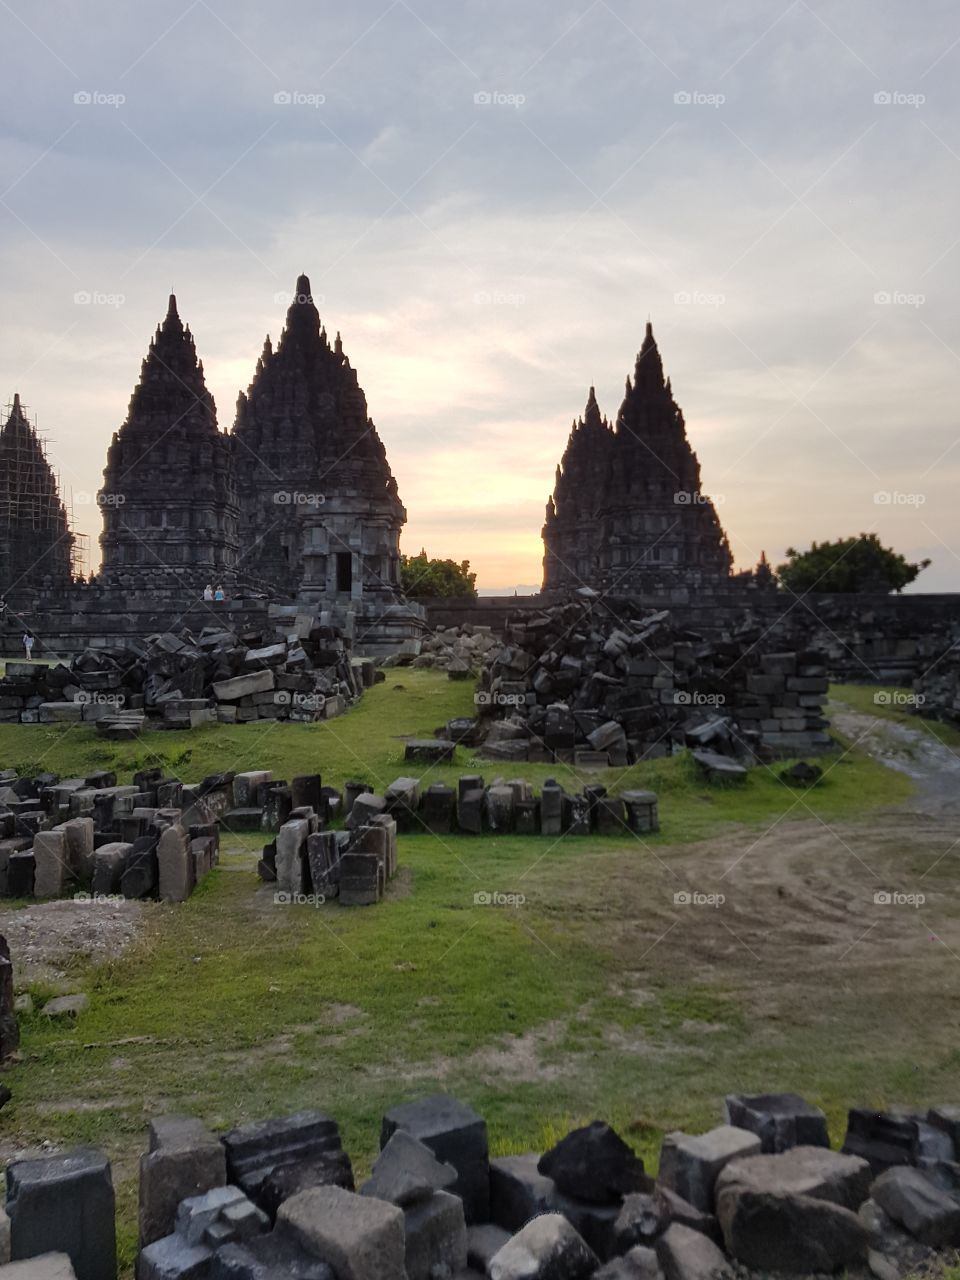 Hindu temple in Indonesia at sunset